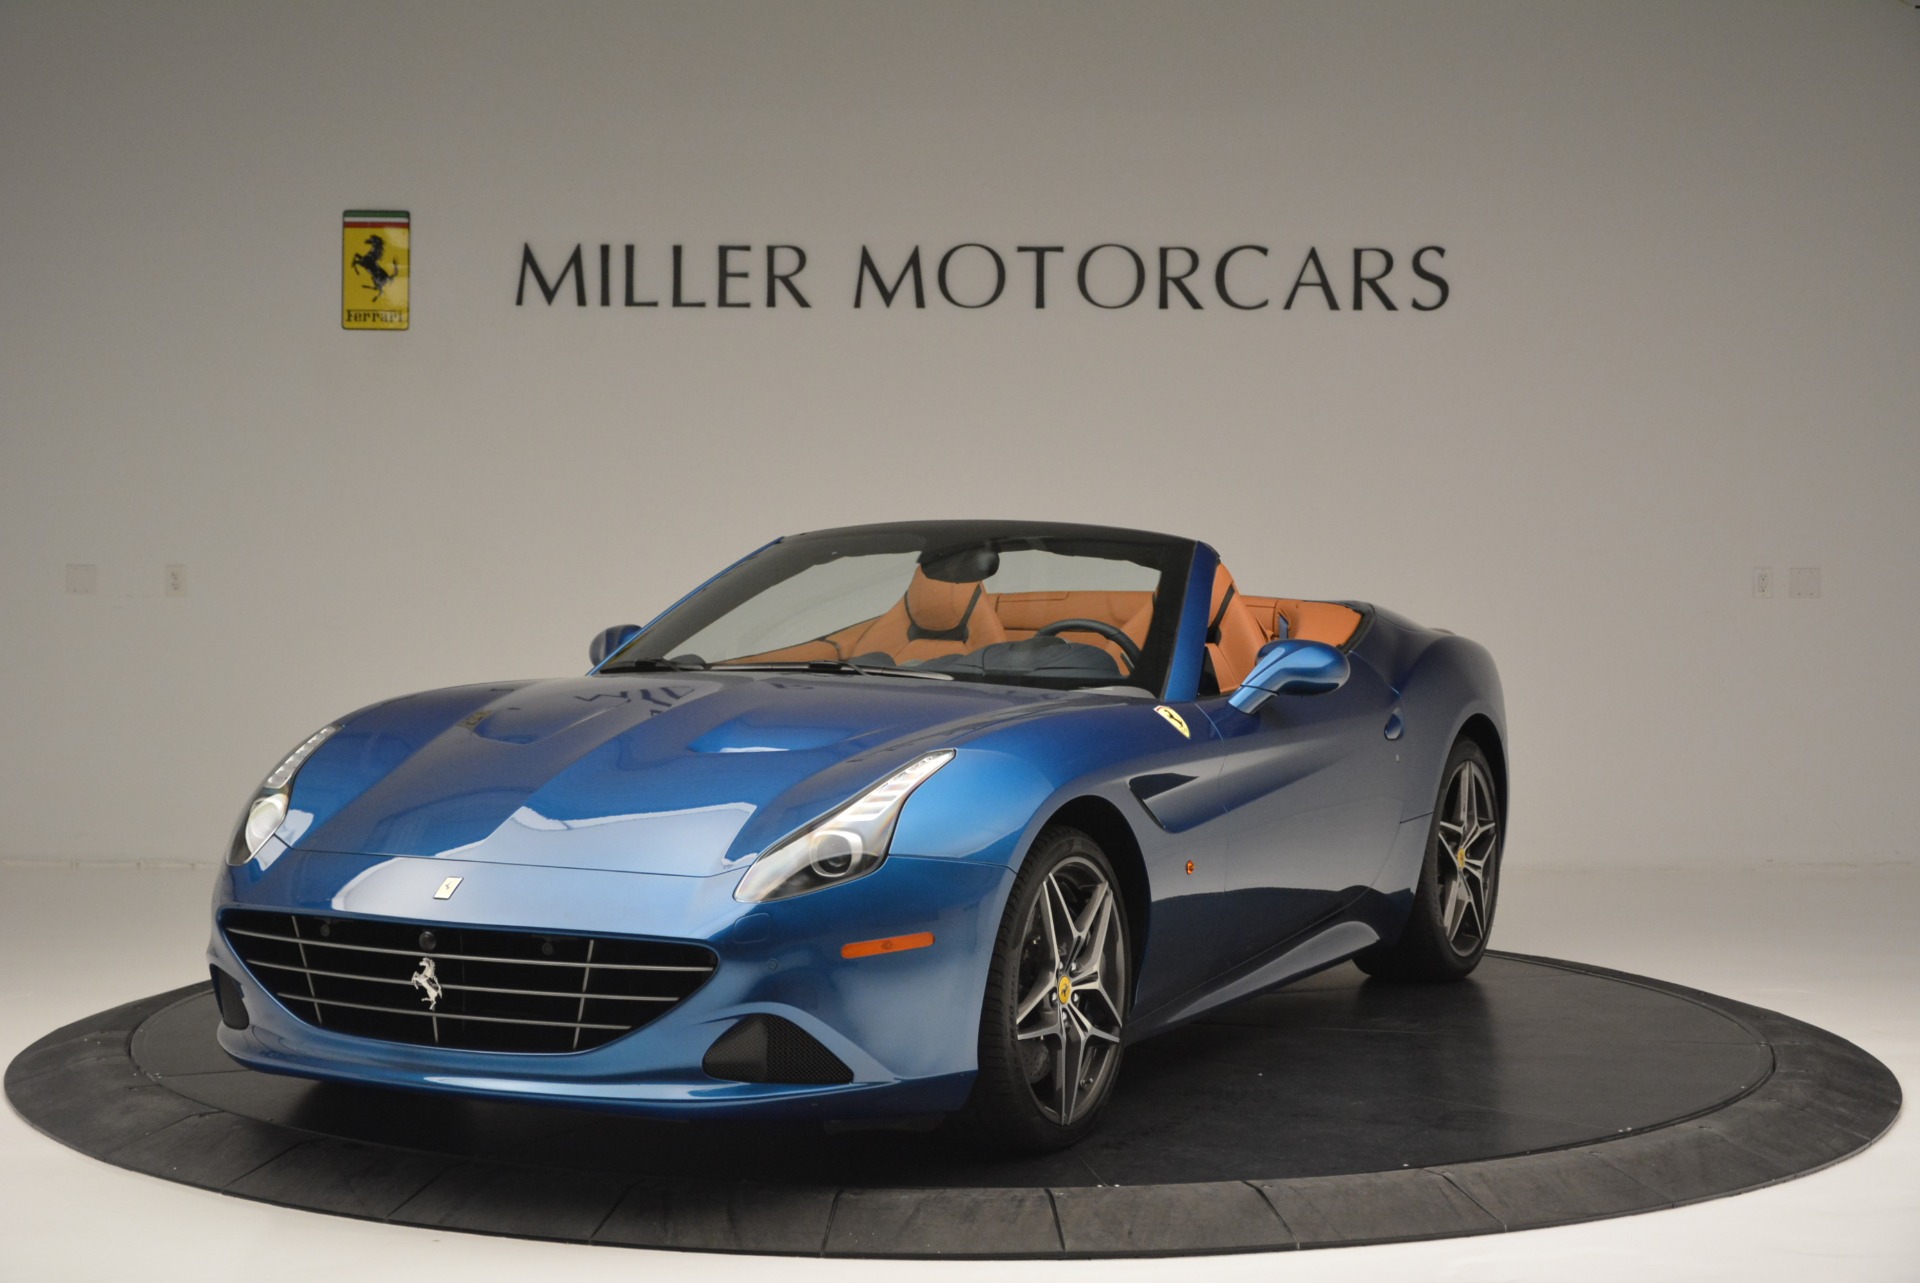 Used 2017 Ferrari California T Handling Speciale for sale Sold at Pagani of Greenwich in Greenwich CT 06830 1